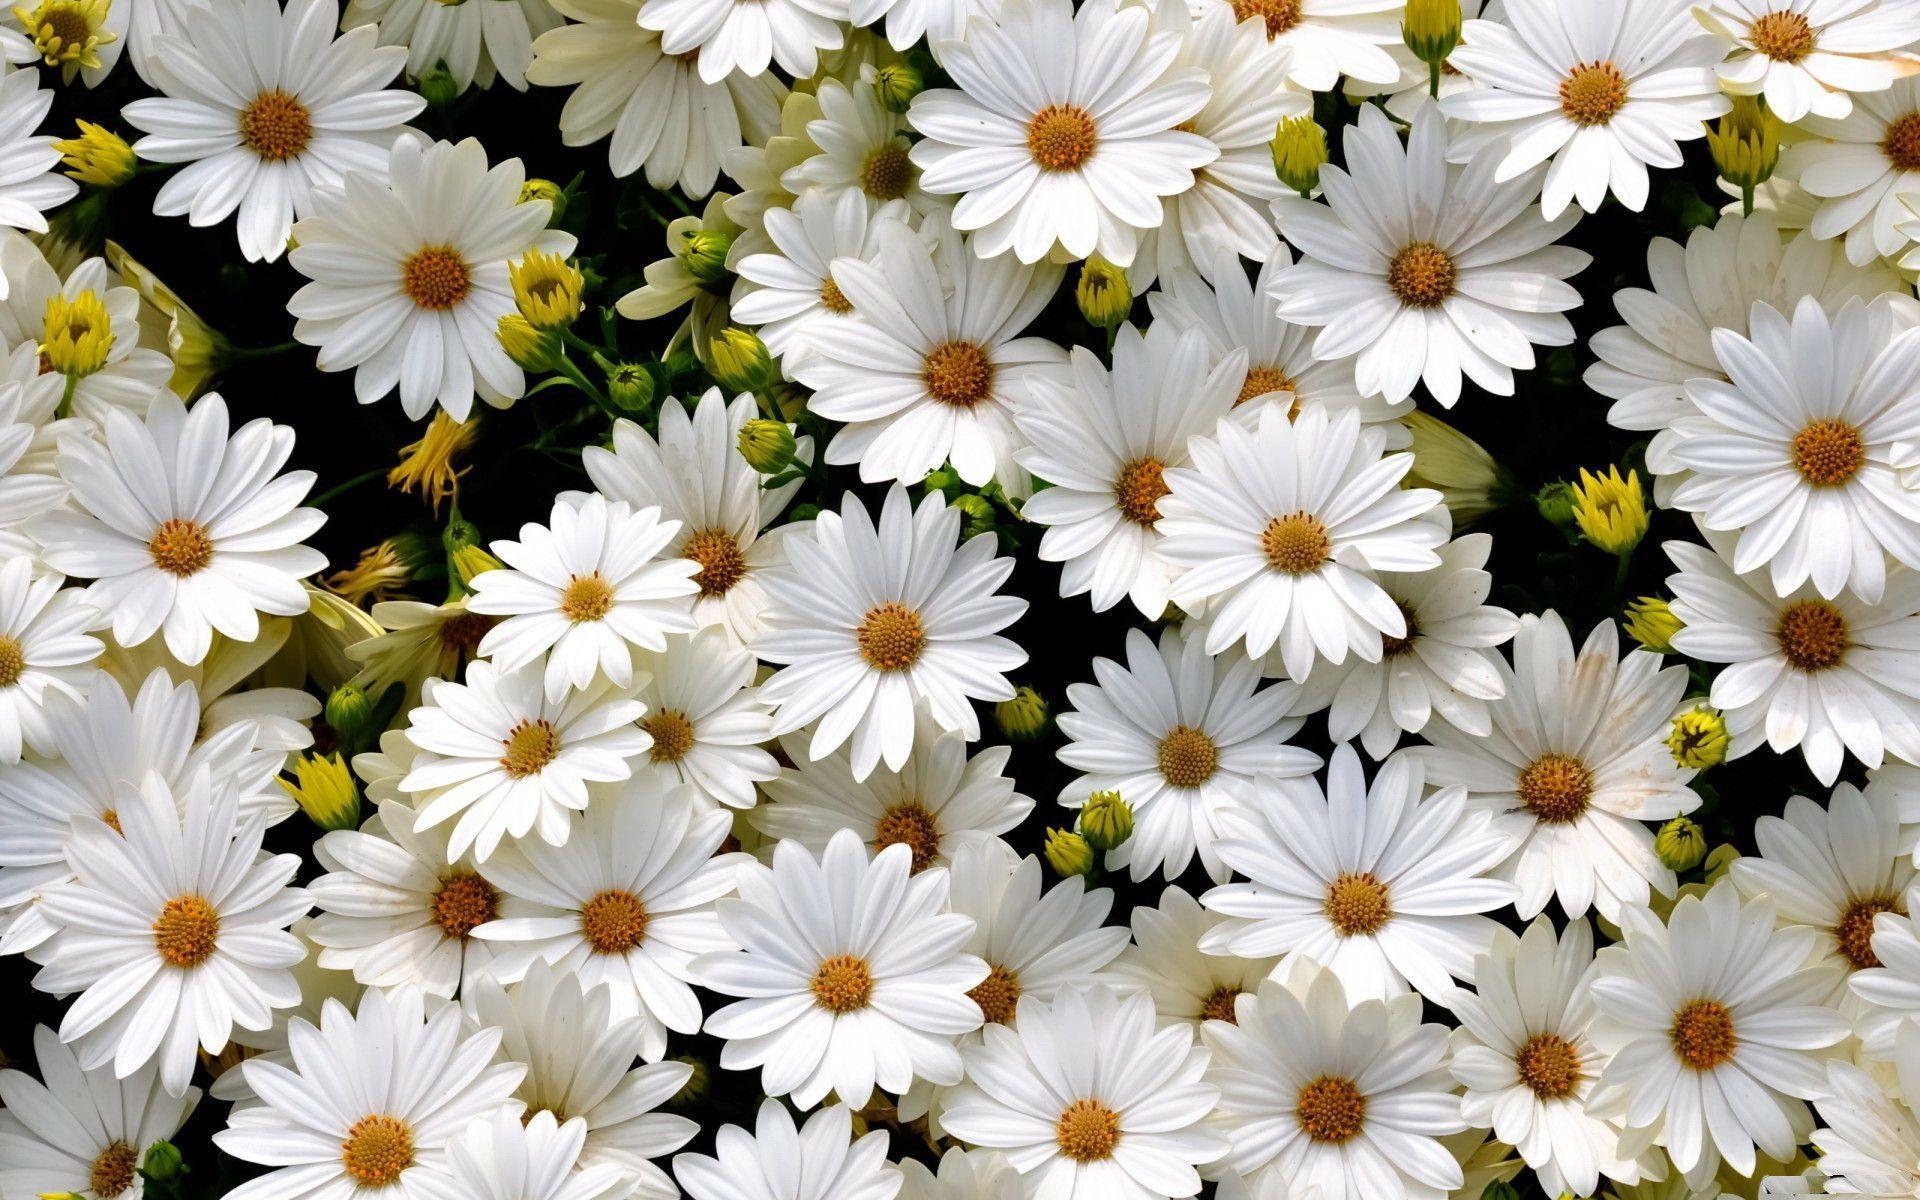 20 Excellent daisy flower wallpaper aesthetic You Can Save It At No ...